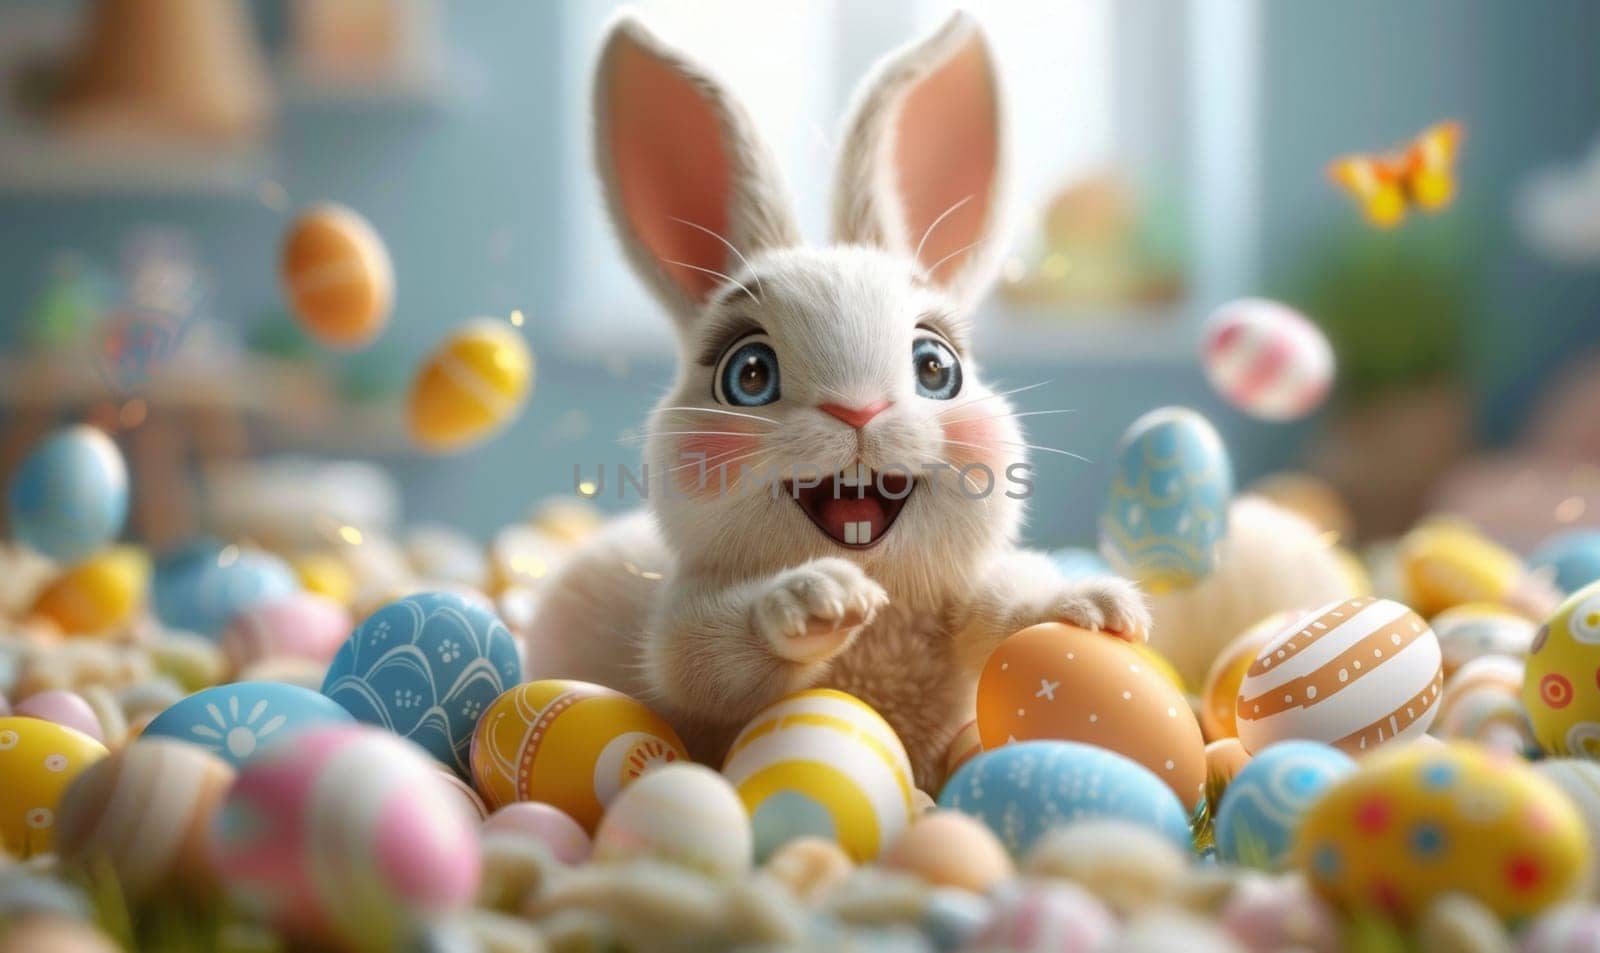 A cartoon rabbit is playing with a bunch of Easter eggs. The rabbit is surrounded by eggs of different colors, including yellow, blue, and pink. The scene is cheerful and playful